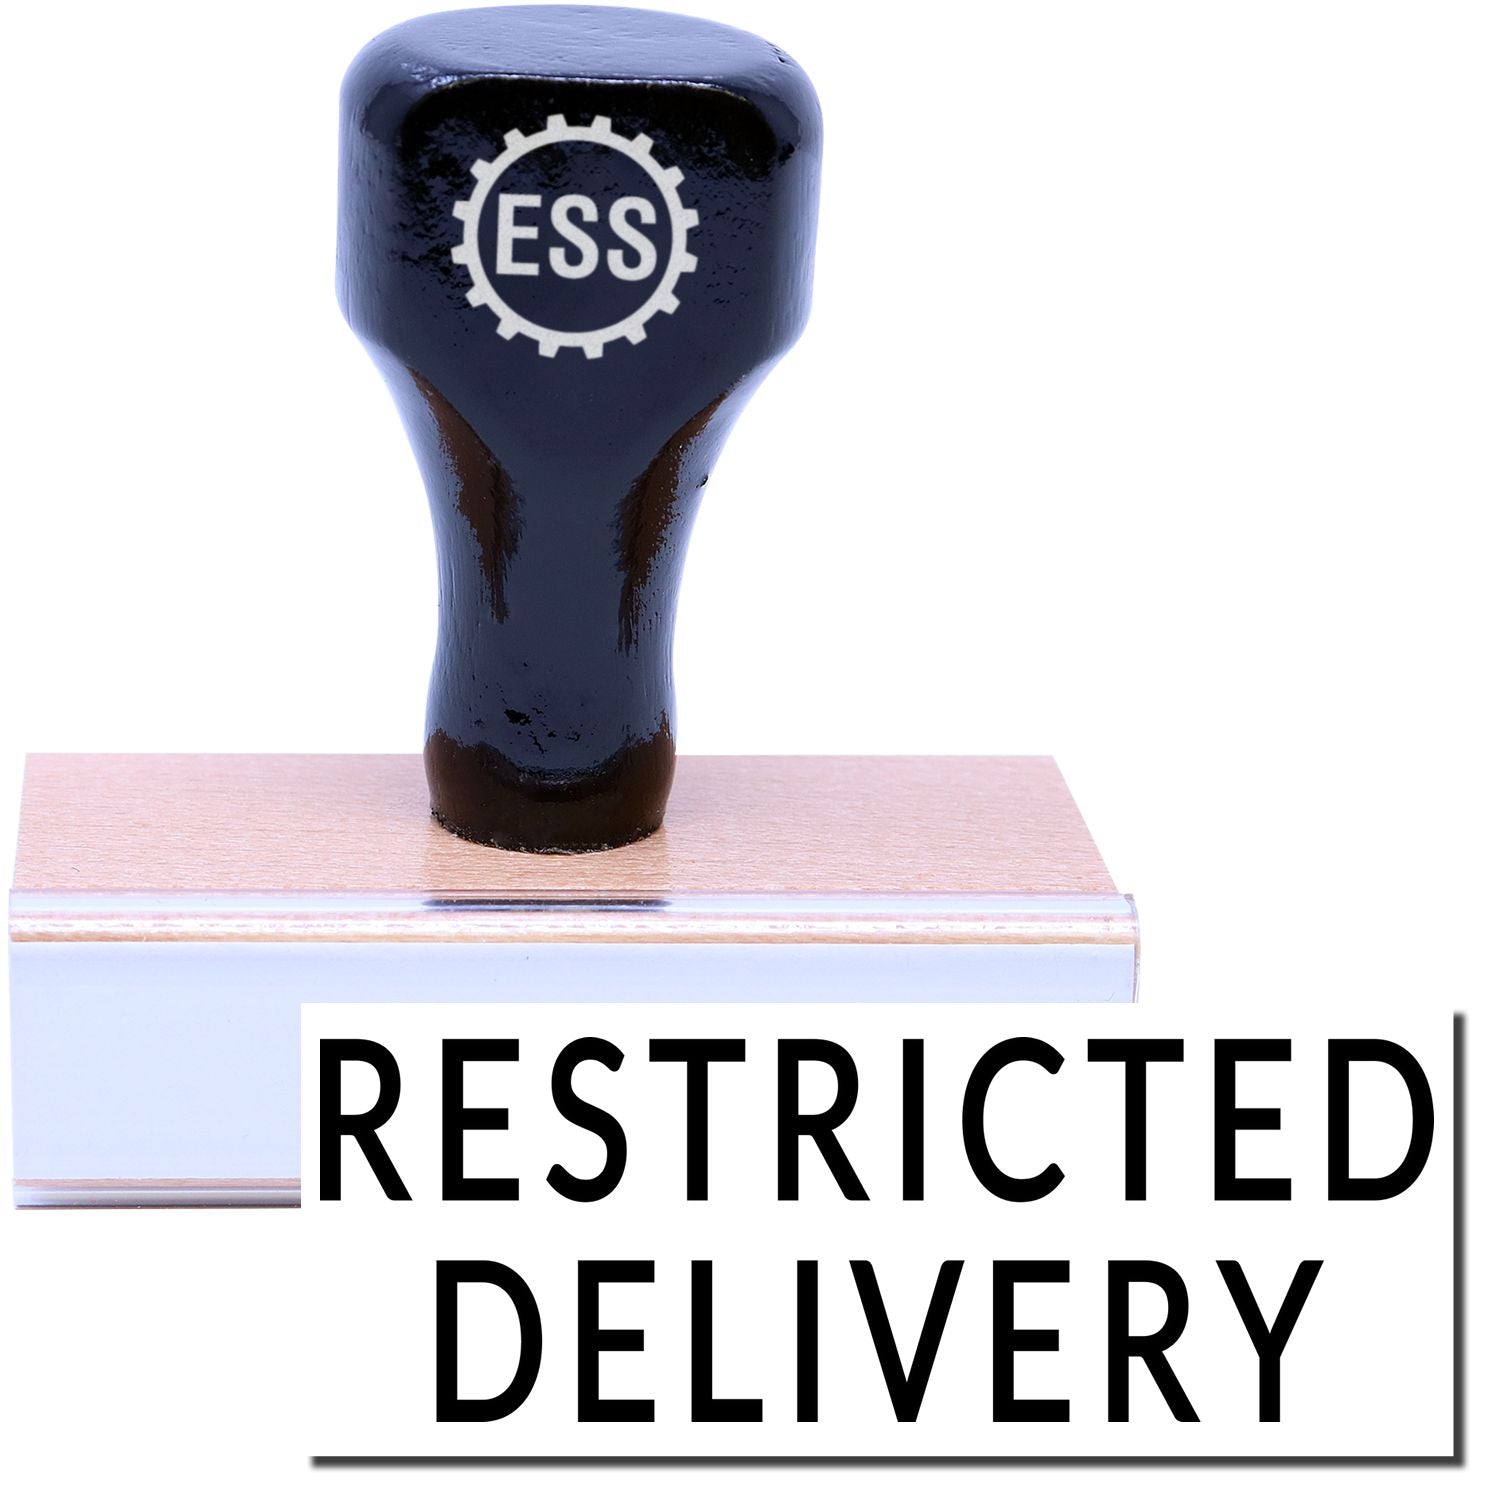 A stock office rubber stamp with a stamped image showing how the text "RESTRICTED DELIVERY" in a large font is displayed after stamping.